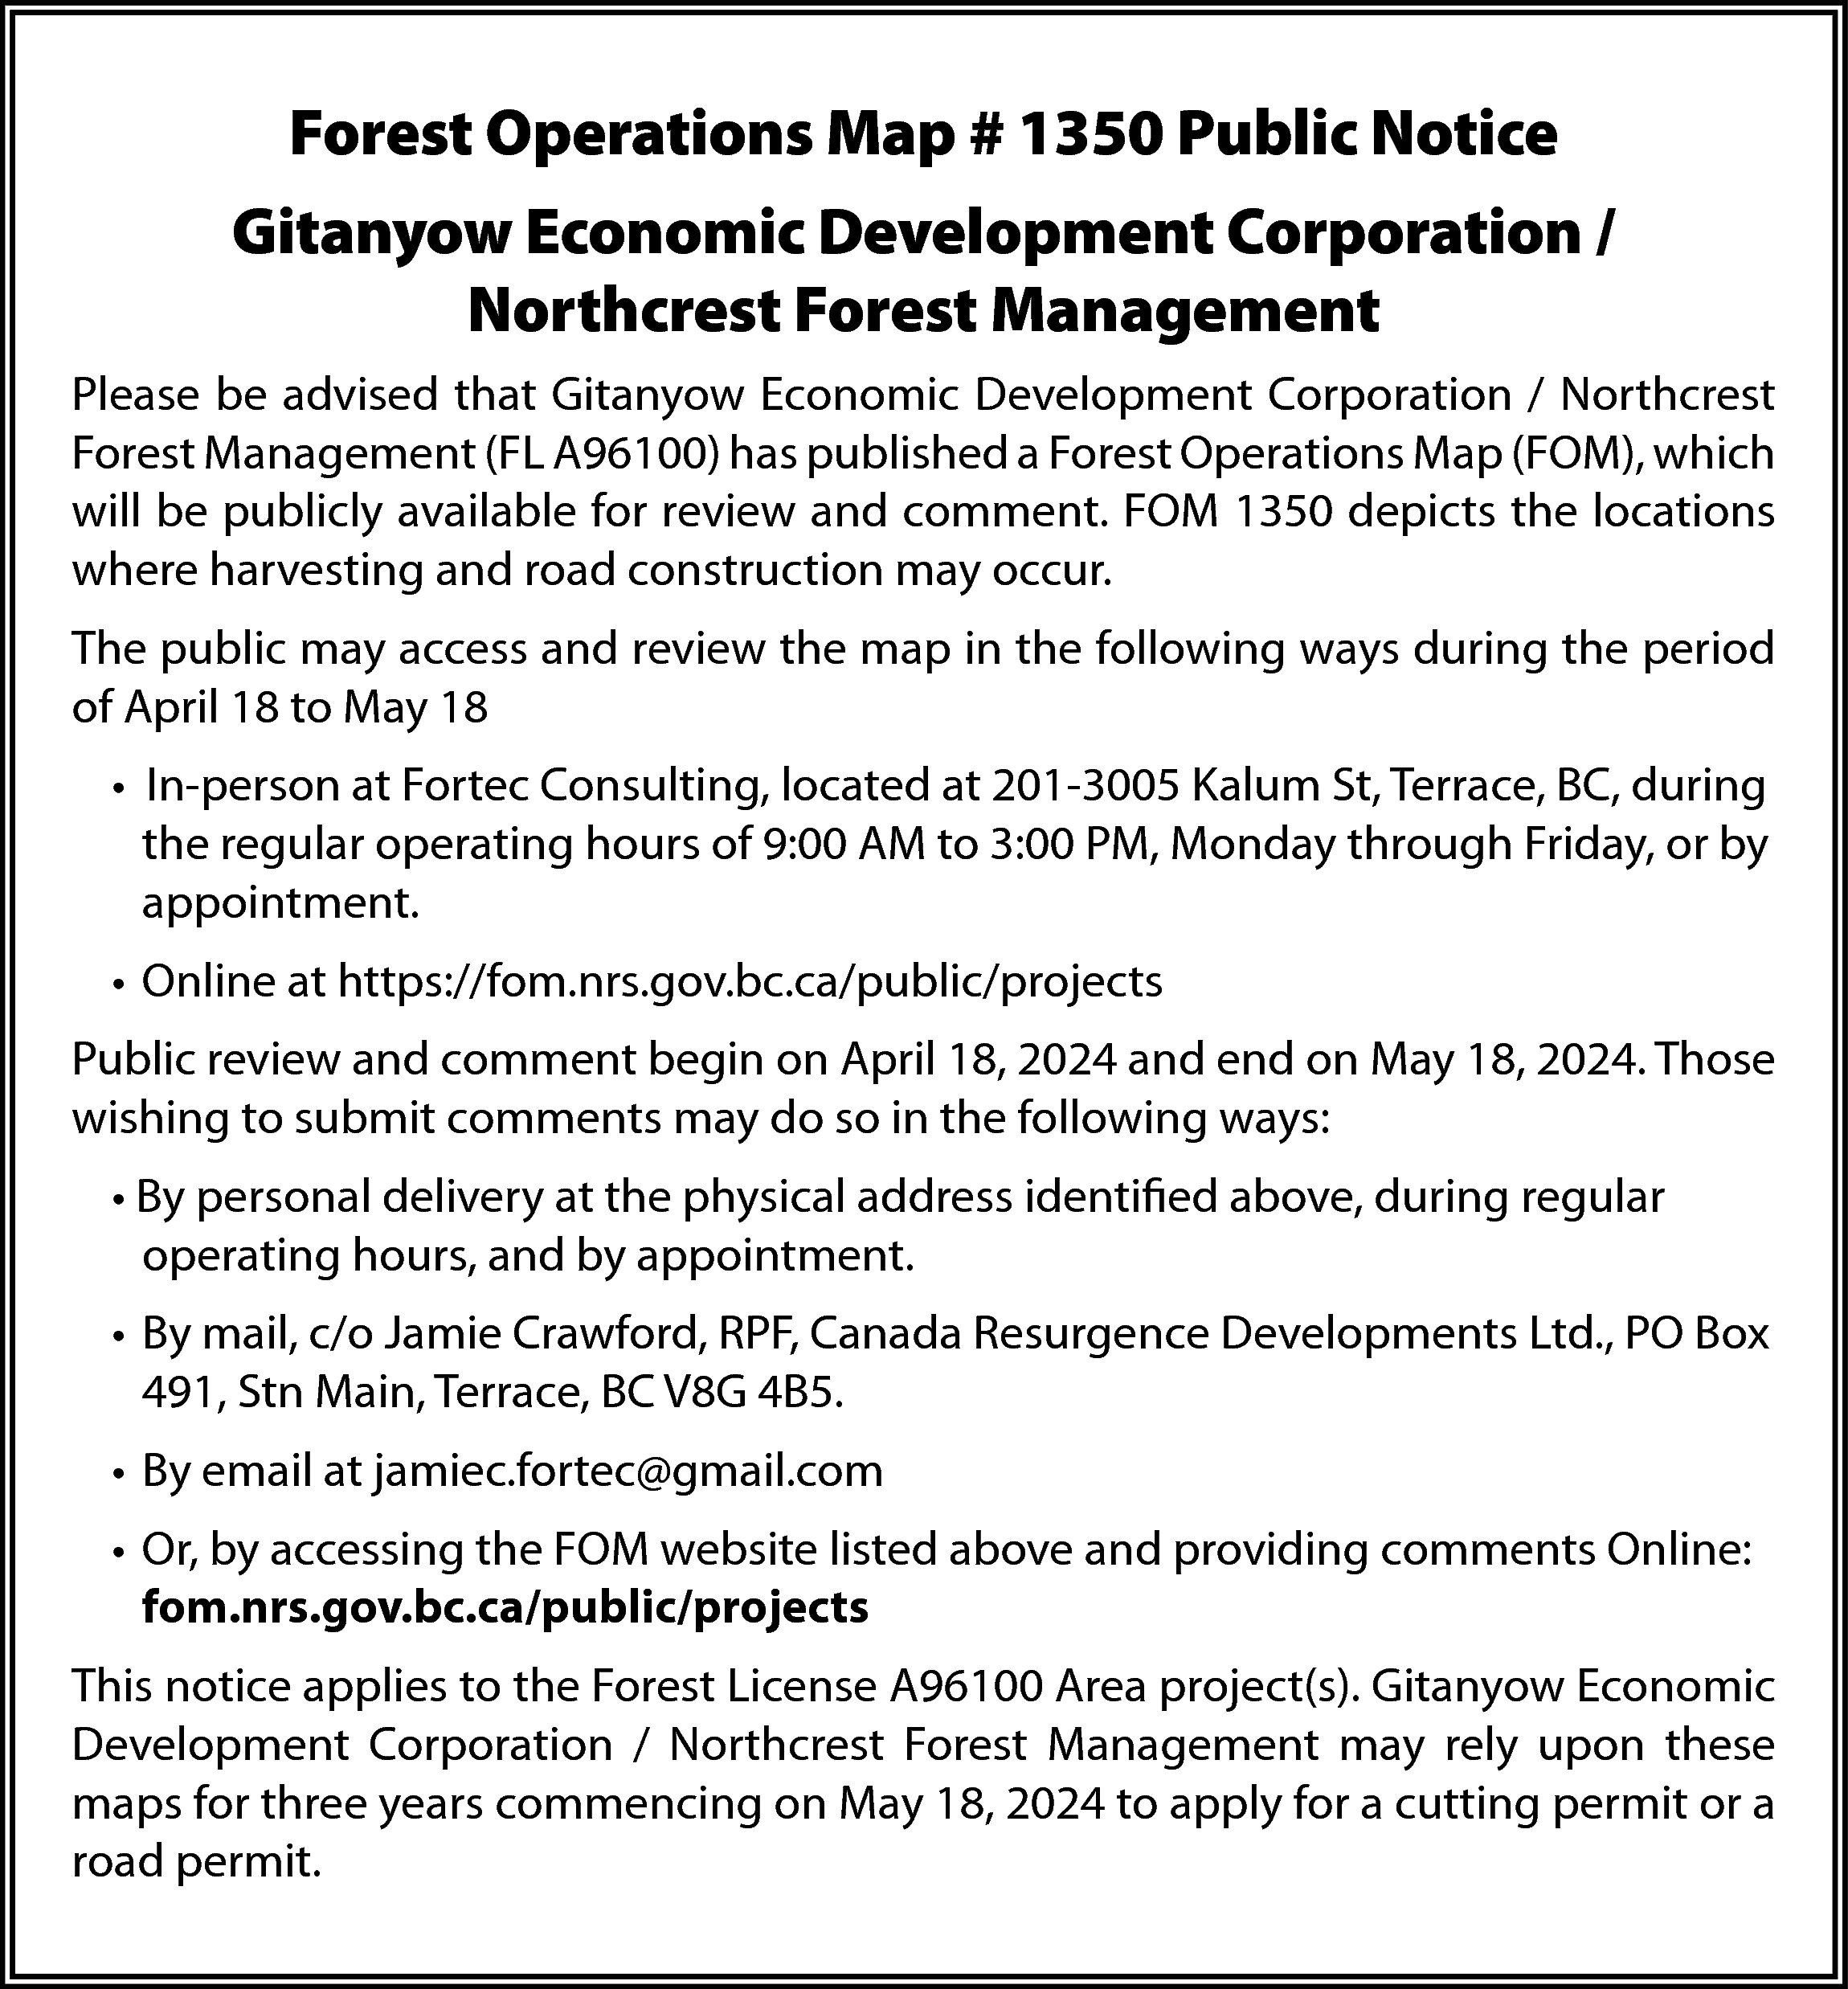 Forest Operations Map # 1350  Forest Operations Map # 1350 Public Notice  Gitanyow Economic Development Corporation /  Northcrest Forest Management  Please be advised that Gitanyow Economic Development Corporation / Northcrest  Forest Management (FL A96100) has published a Forest Operations Map (FOM), which  will be publicly available for review and comment. FOM 1350 depicts the locations  where harvesting and road construction may occur.  The public may access and review the map in the following ways during the period  of April 18 to May 18  • In-person at Fortec Consulting, located at 201-3005 Kalum St, Terrace, BC, during  the regular operating hours of 9:00 AM to 3:00 PM, Monday through Friday, or by  appointment.  • Online at https://fom.nrs.gov.bc.ca/public/projects  Public review and comment begin on April 18, 2024 and end on May 18, 2024. Those  wishing to submit comments may do so in the following ways:  • By personal delivery at the physical address identified above, during regular  operating hours, and by appointment.  • By mail, c/o Jamie Crawford, RPF, Canada Resurgence Developments Ltd., PO Box  491, Stn Main, Terrace, BC V8G 4B5.  • By email at jamiec.fortec@gmail.com  • Or, by accessing the FOM website listed above and providing comments Online:  fom.nrs.gov.bc.ca/public/projects  This notice applies to the Forest License A96100 Area project(s). Gitanyow Economic  Development Corporation / Northcrest Forest Management may rely upon these  maps for three years commencing on May 18, 2024 to apply for a cutting permit or a  road permit.    